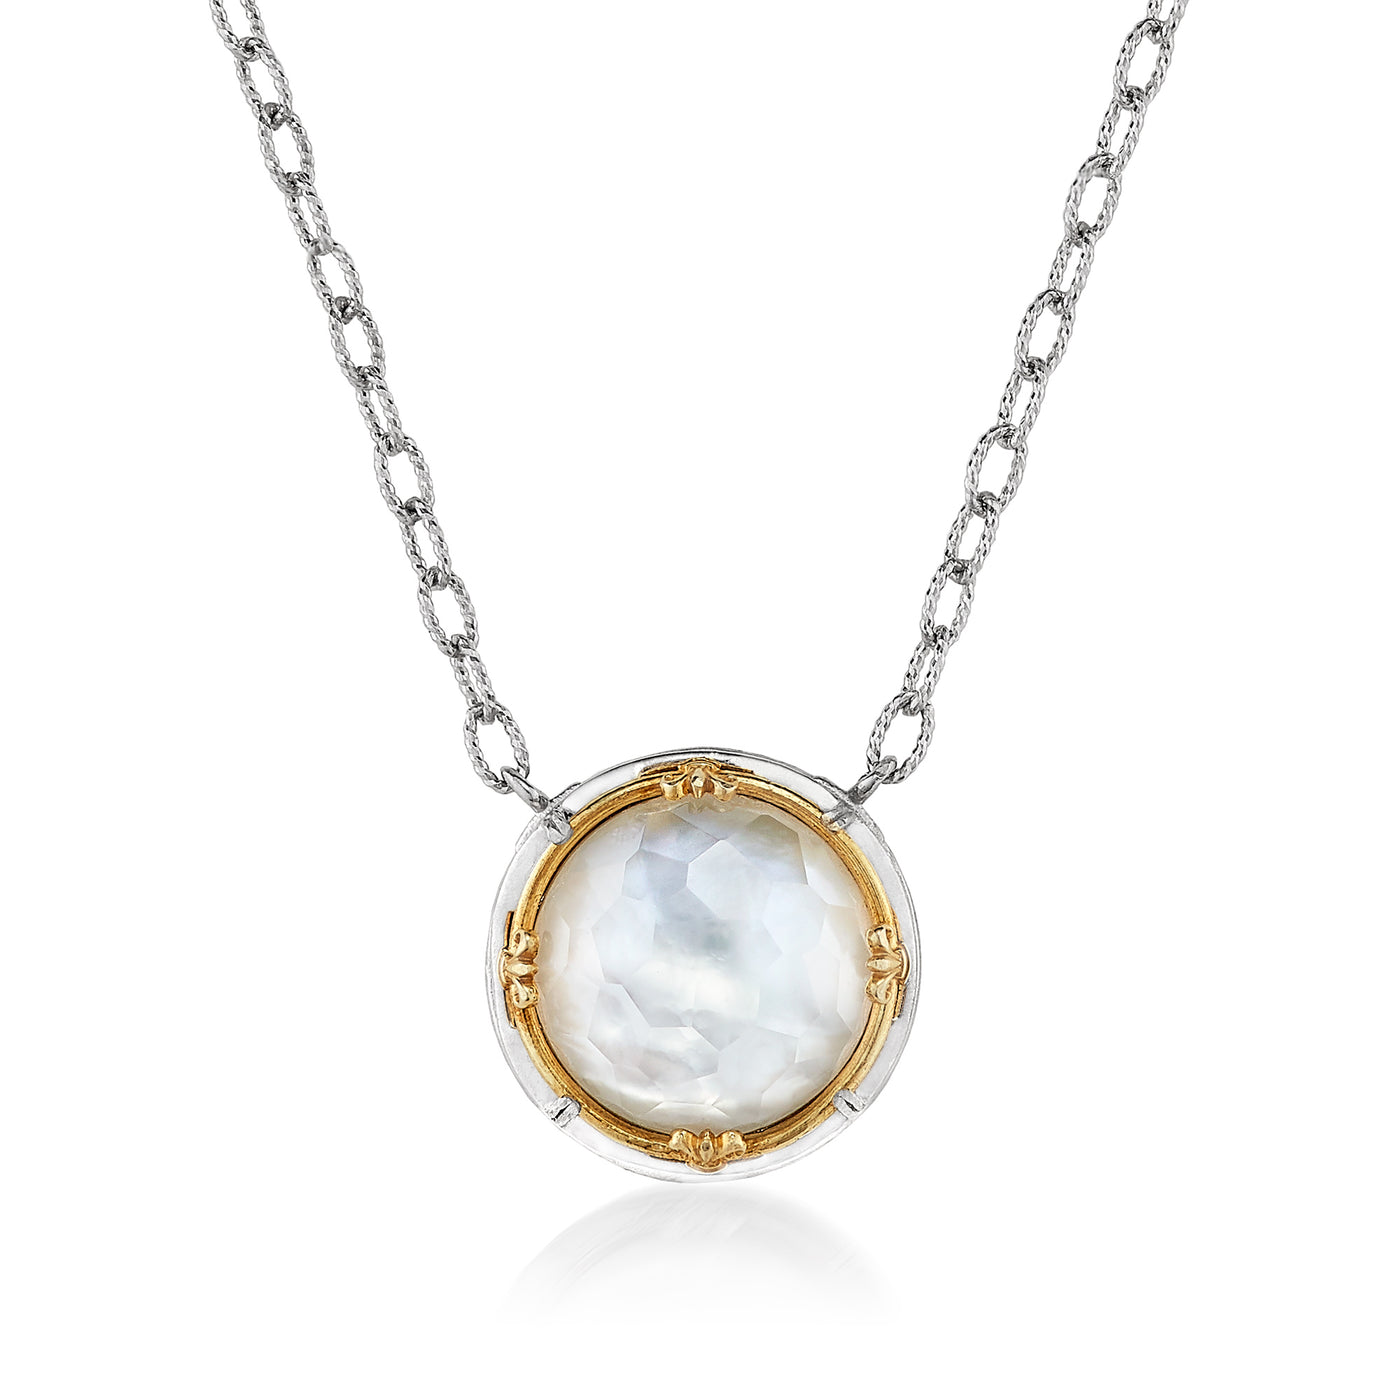 AT 816AT-MOP 2T MOTHER OF PEARL NECKLACE